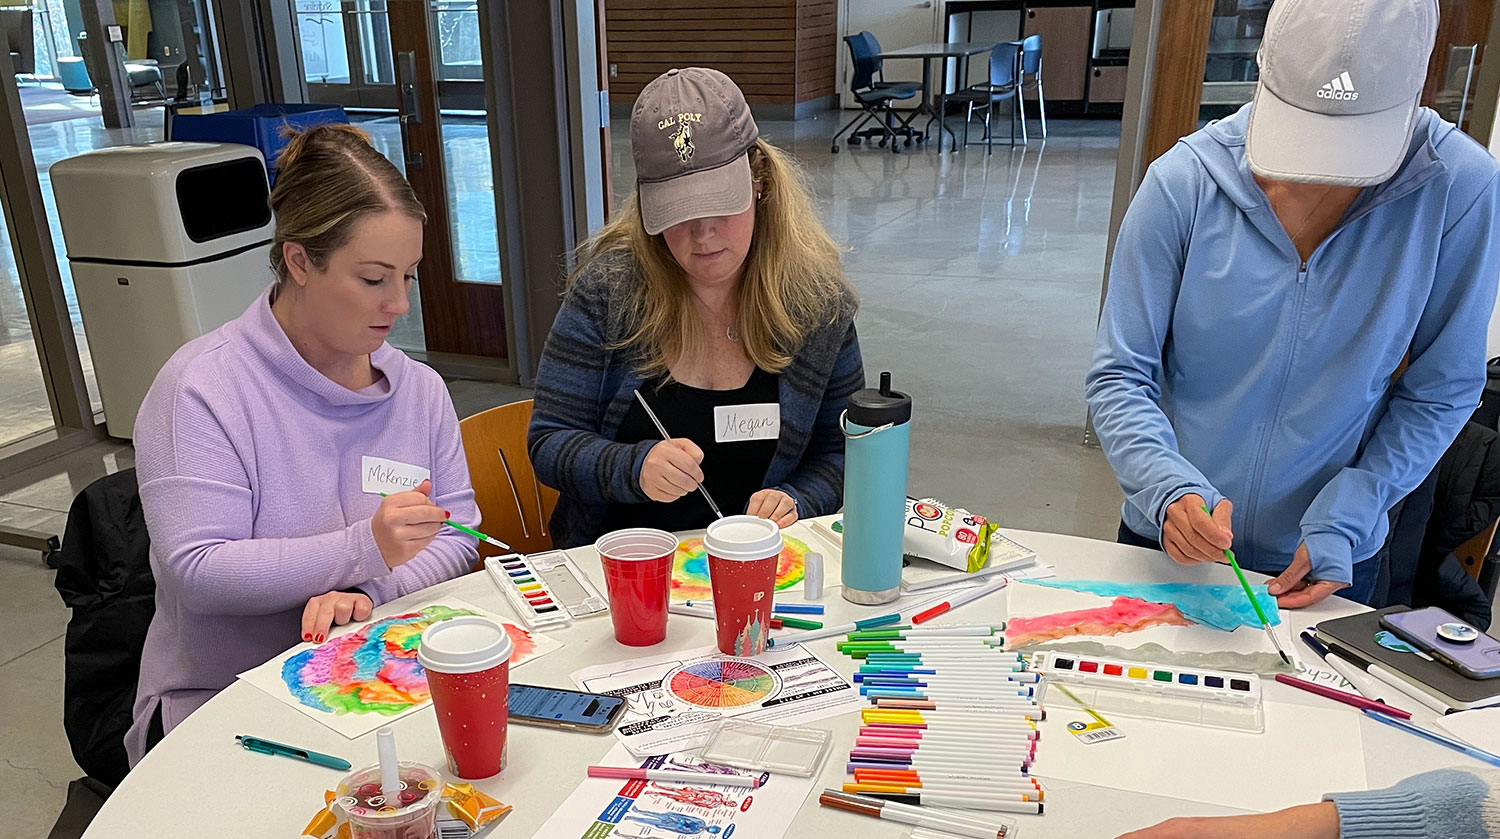 Educators share how they could use creative tools and activities to help their students feel prepared to take climate action at EarthGen's Climate Grief & Creative Expression STEM Seminar.